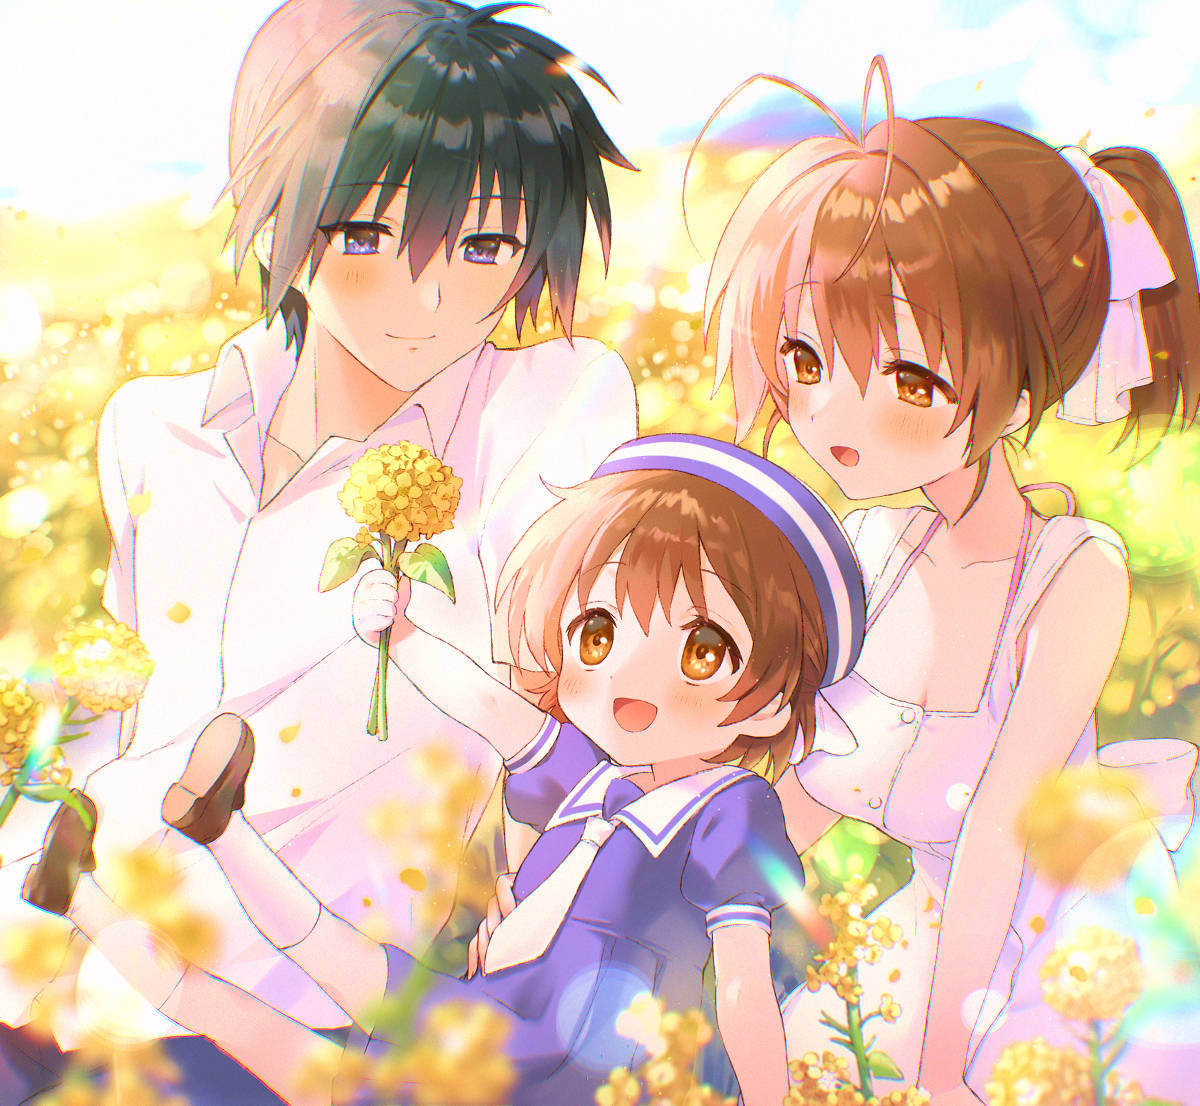 Clannad Chibi Girls - Anime Love and Romance Wallpapers and Images -  Desktop Nexus Groups